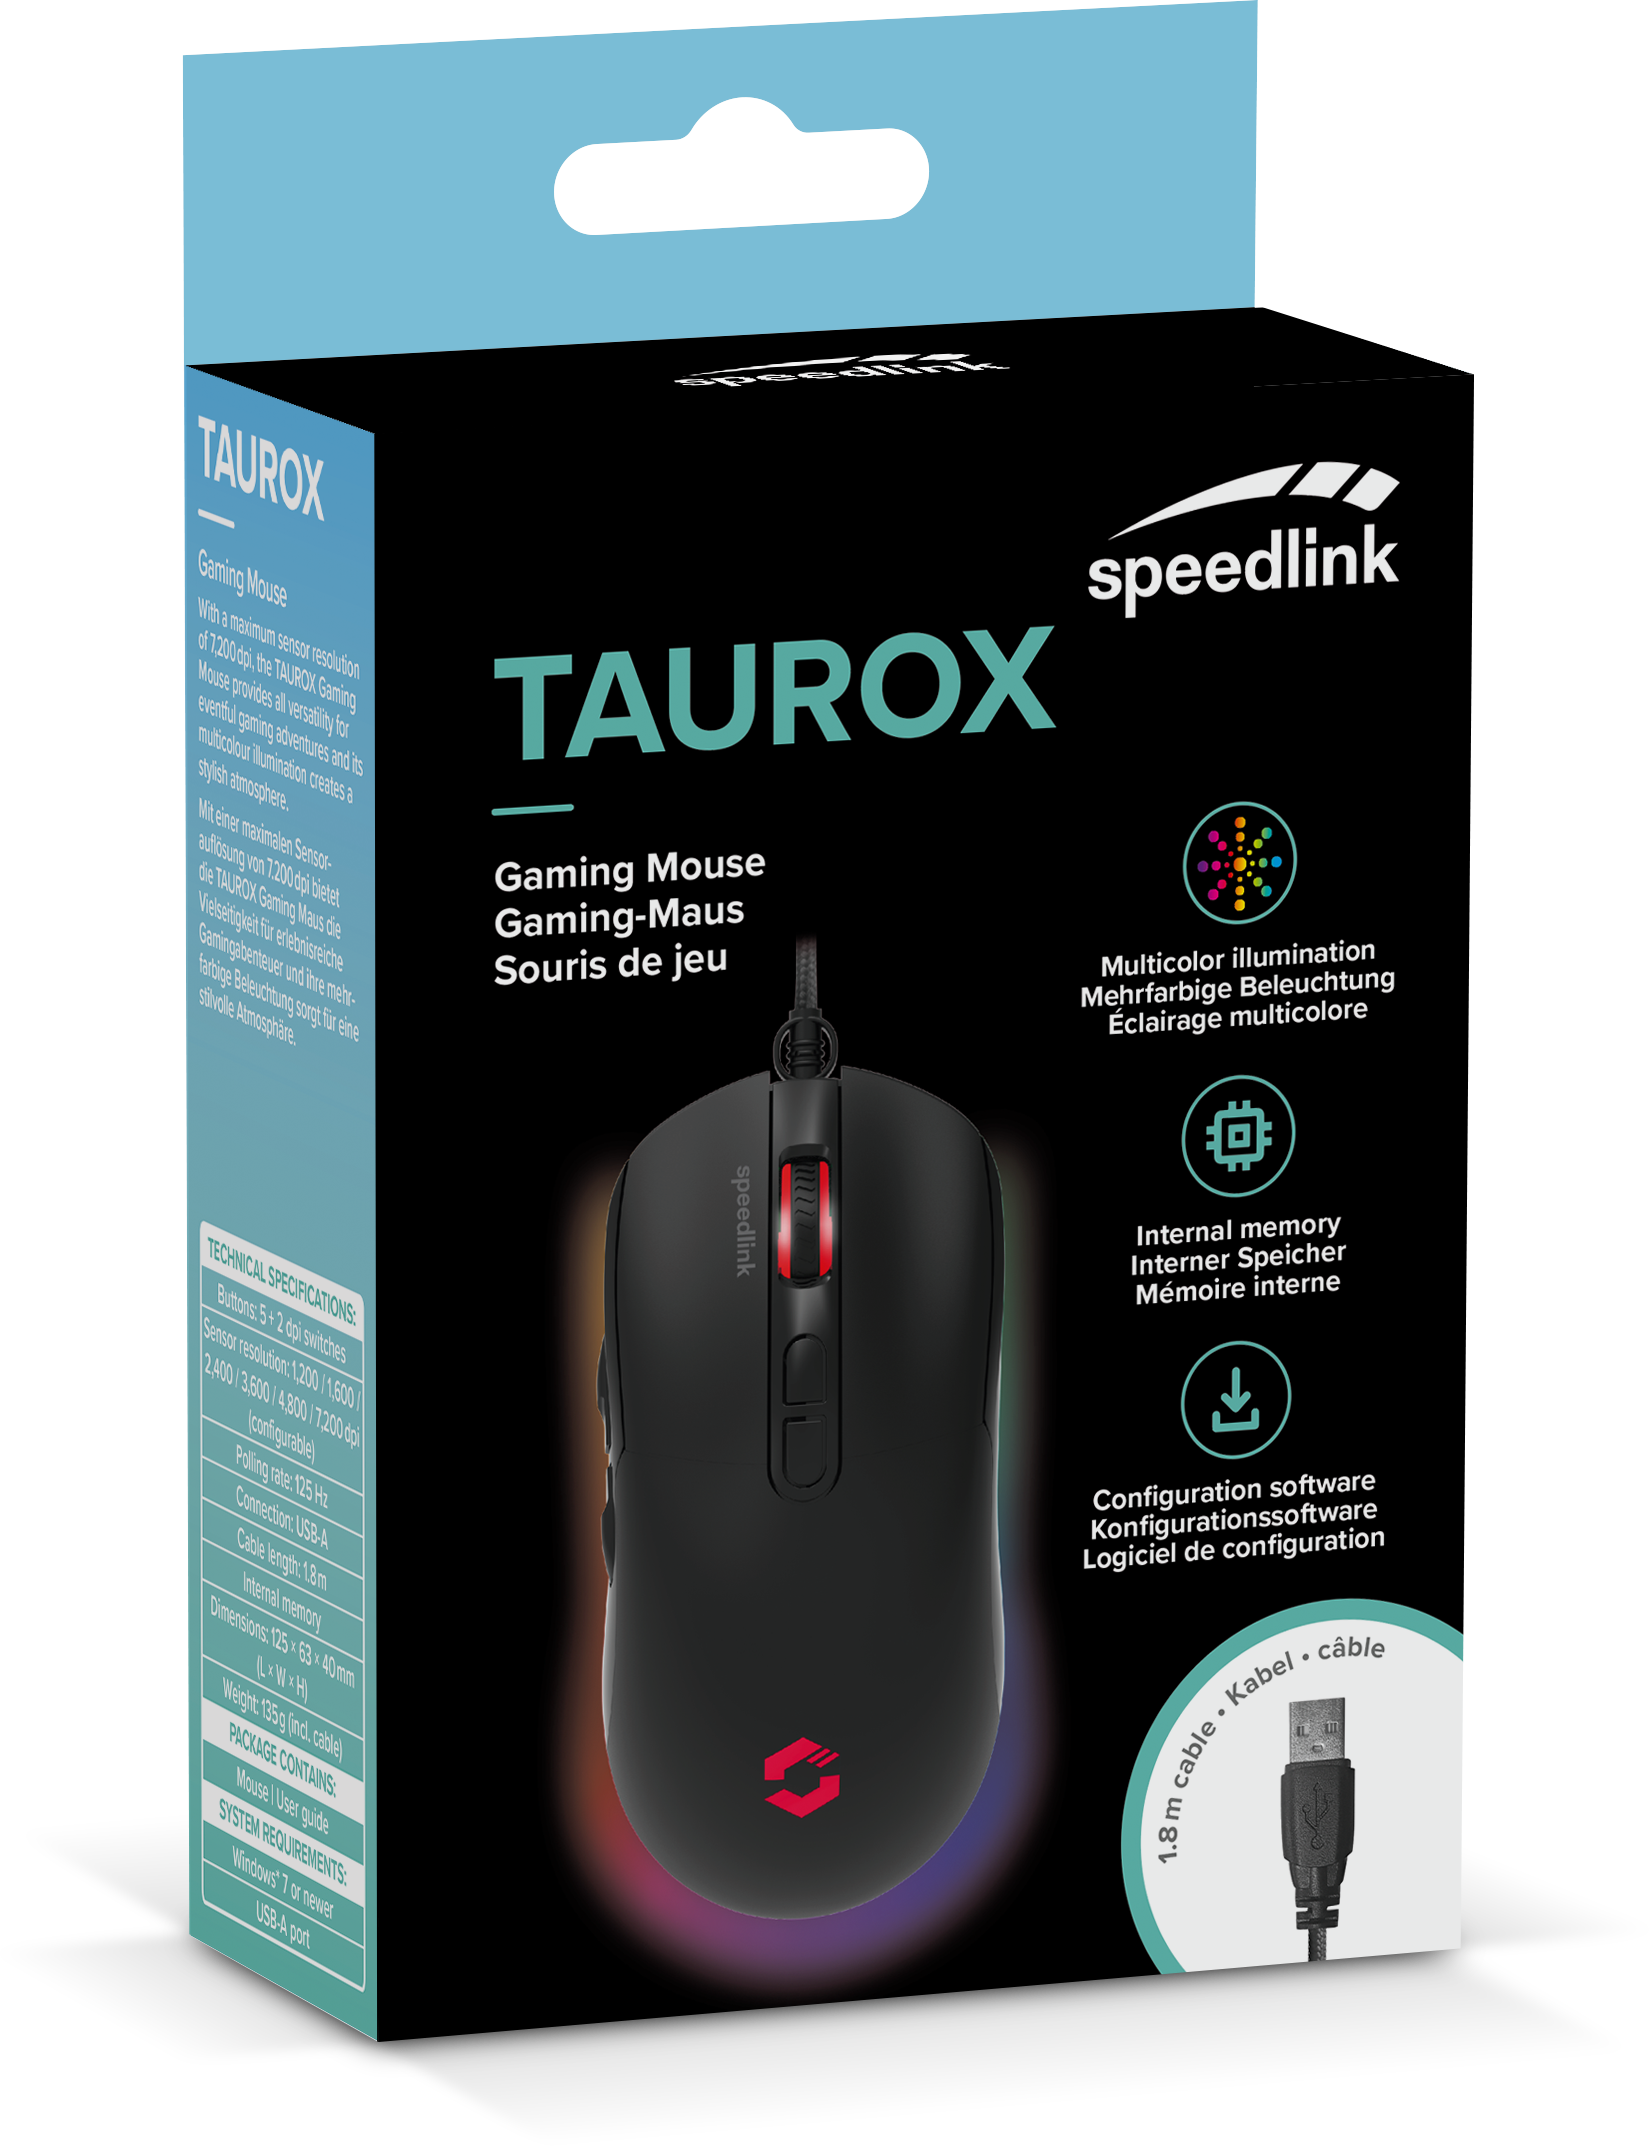 TAUROX Gaming Mouse - Recensione